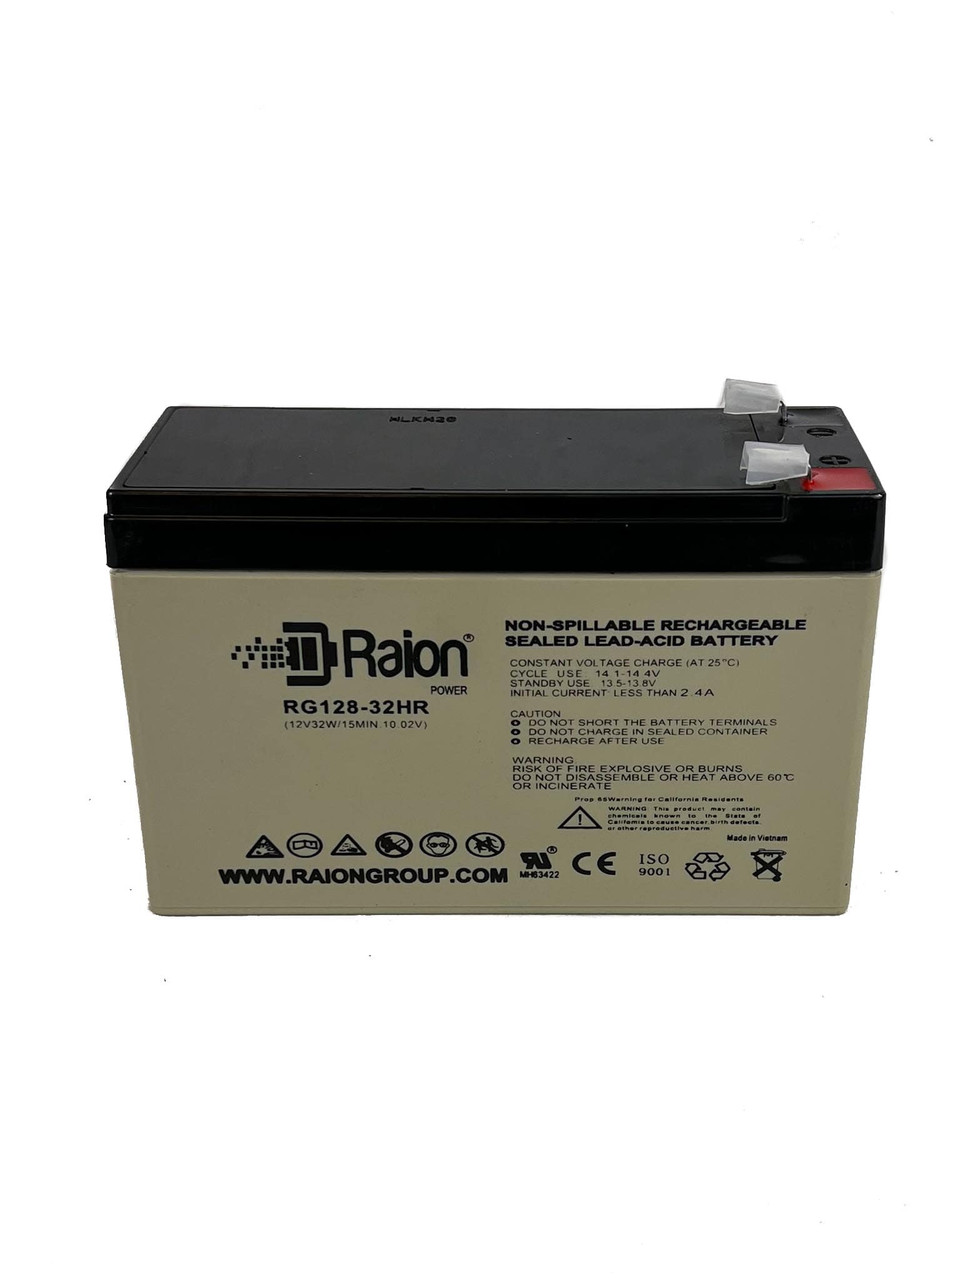 Raion Power RG128-32HR Replacement High Rate Battery Cartridge for APC Back-UPS 650VA BE650G2-FR